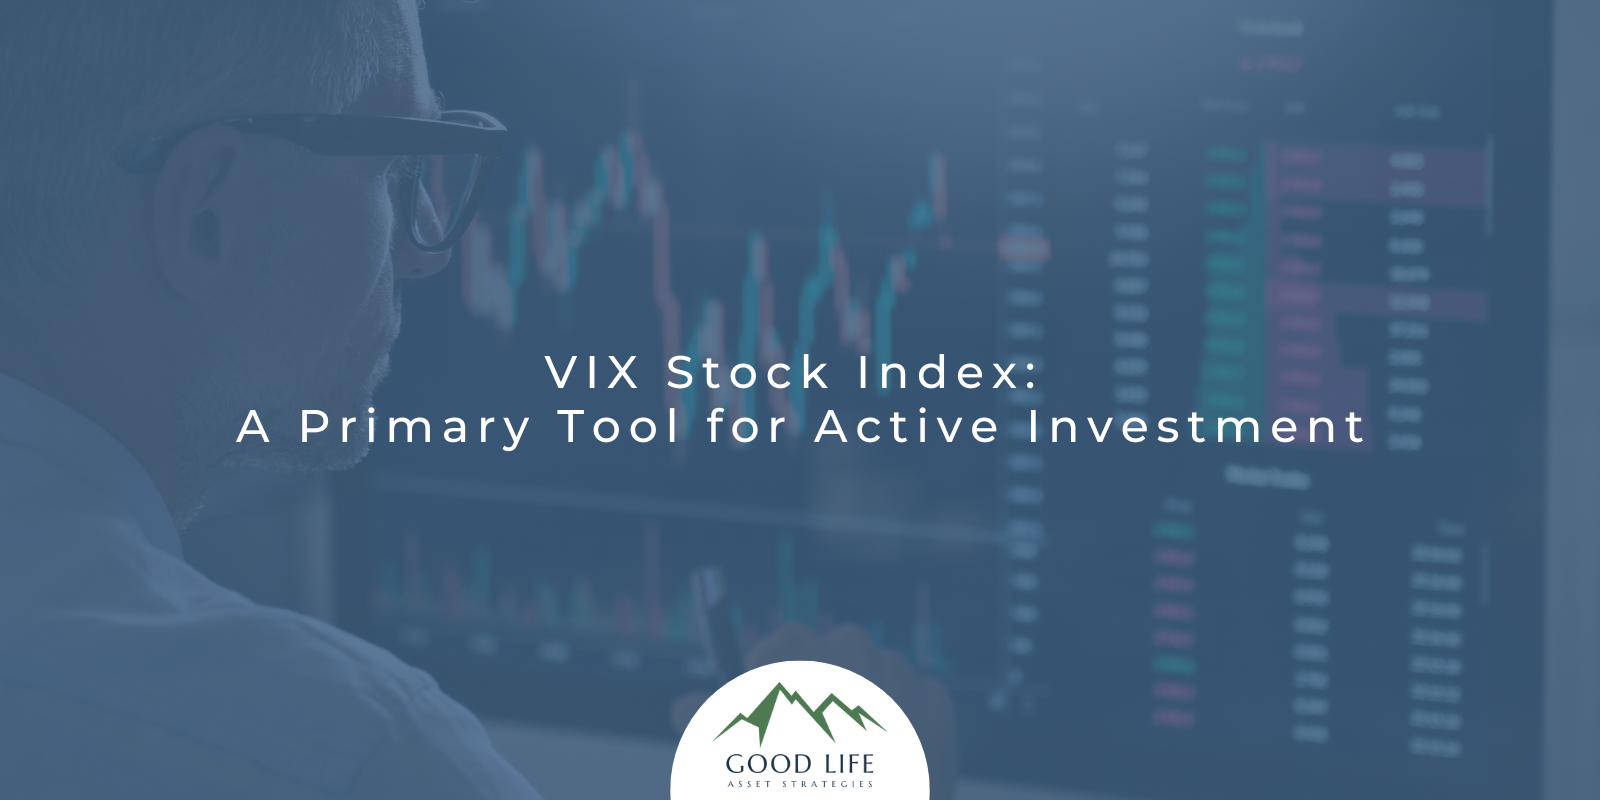 VIX Stock Index: A Primary Tool for Active Investment